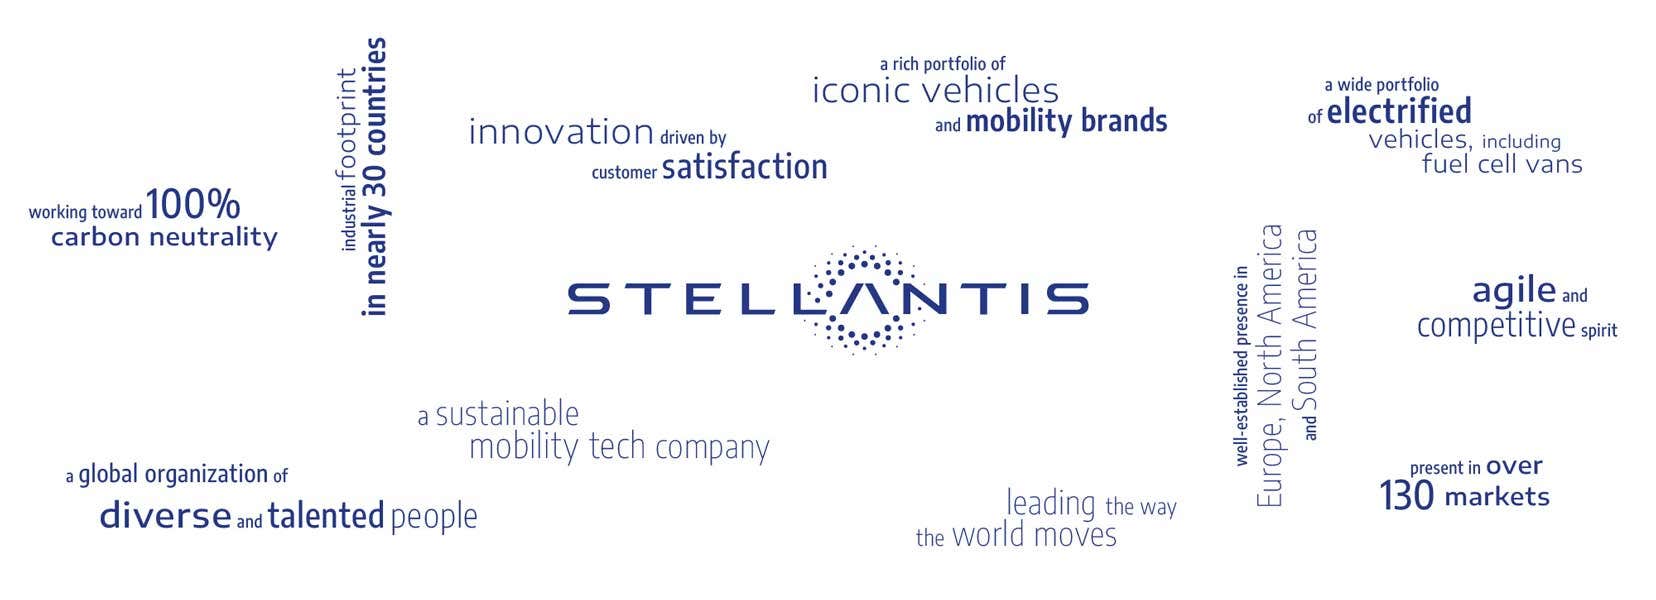 Stellantis Plans To Develop Ethanol Hybrid Vehicles In South America: Report